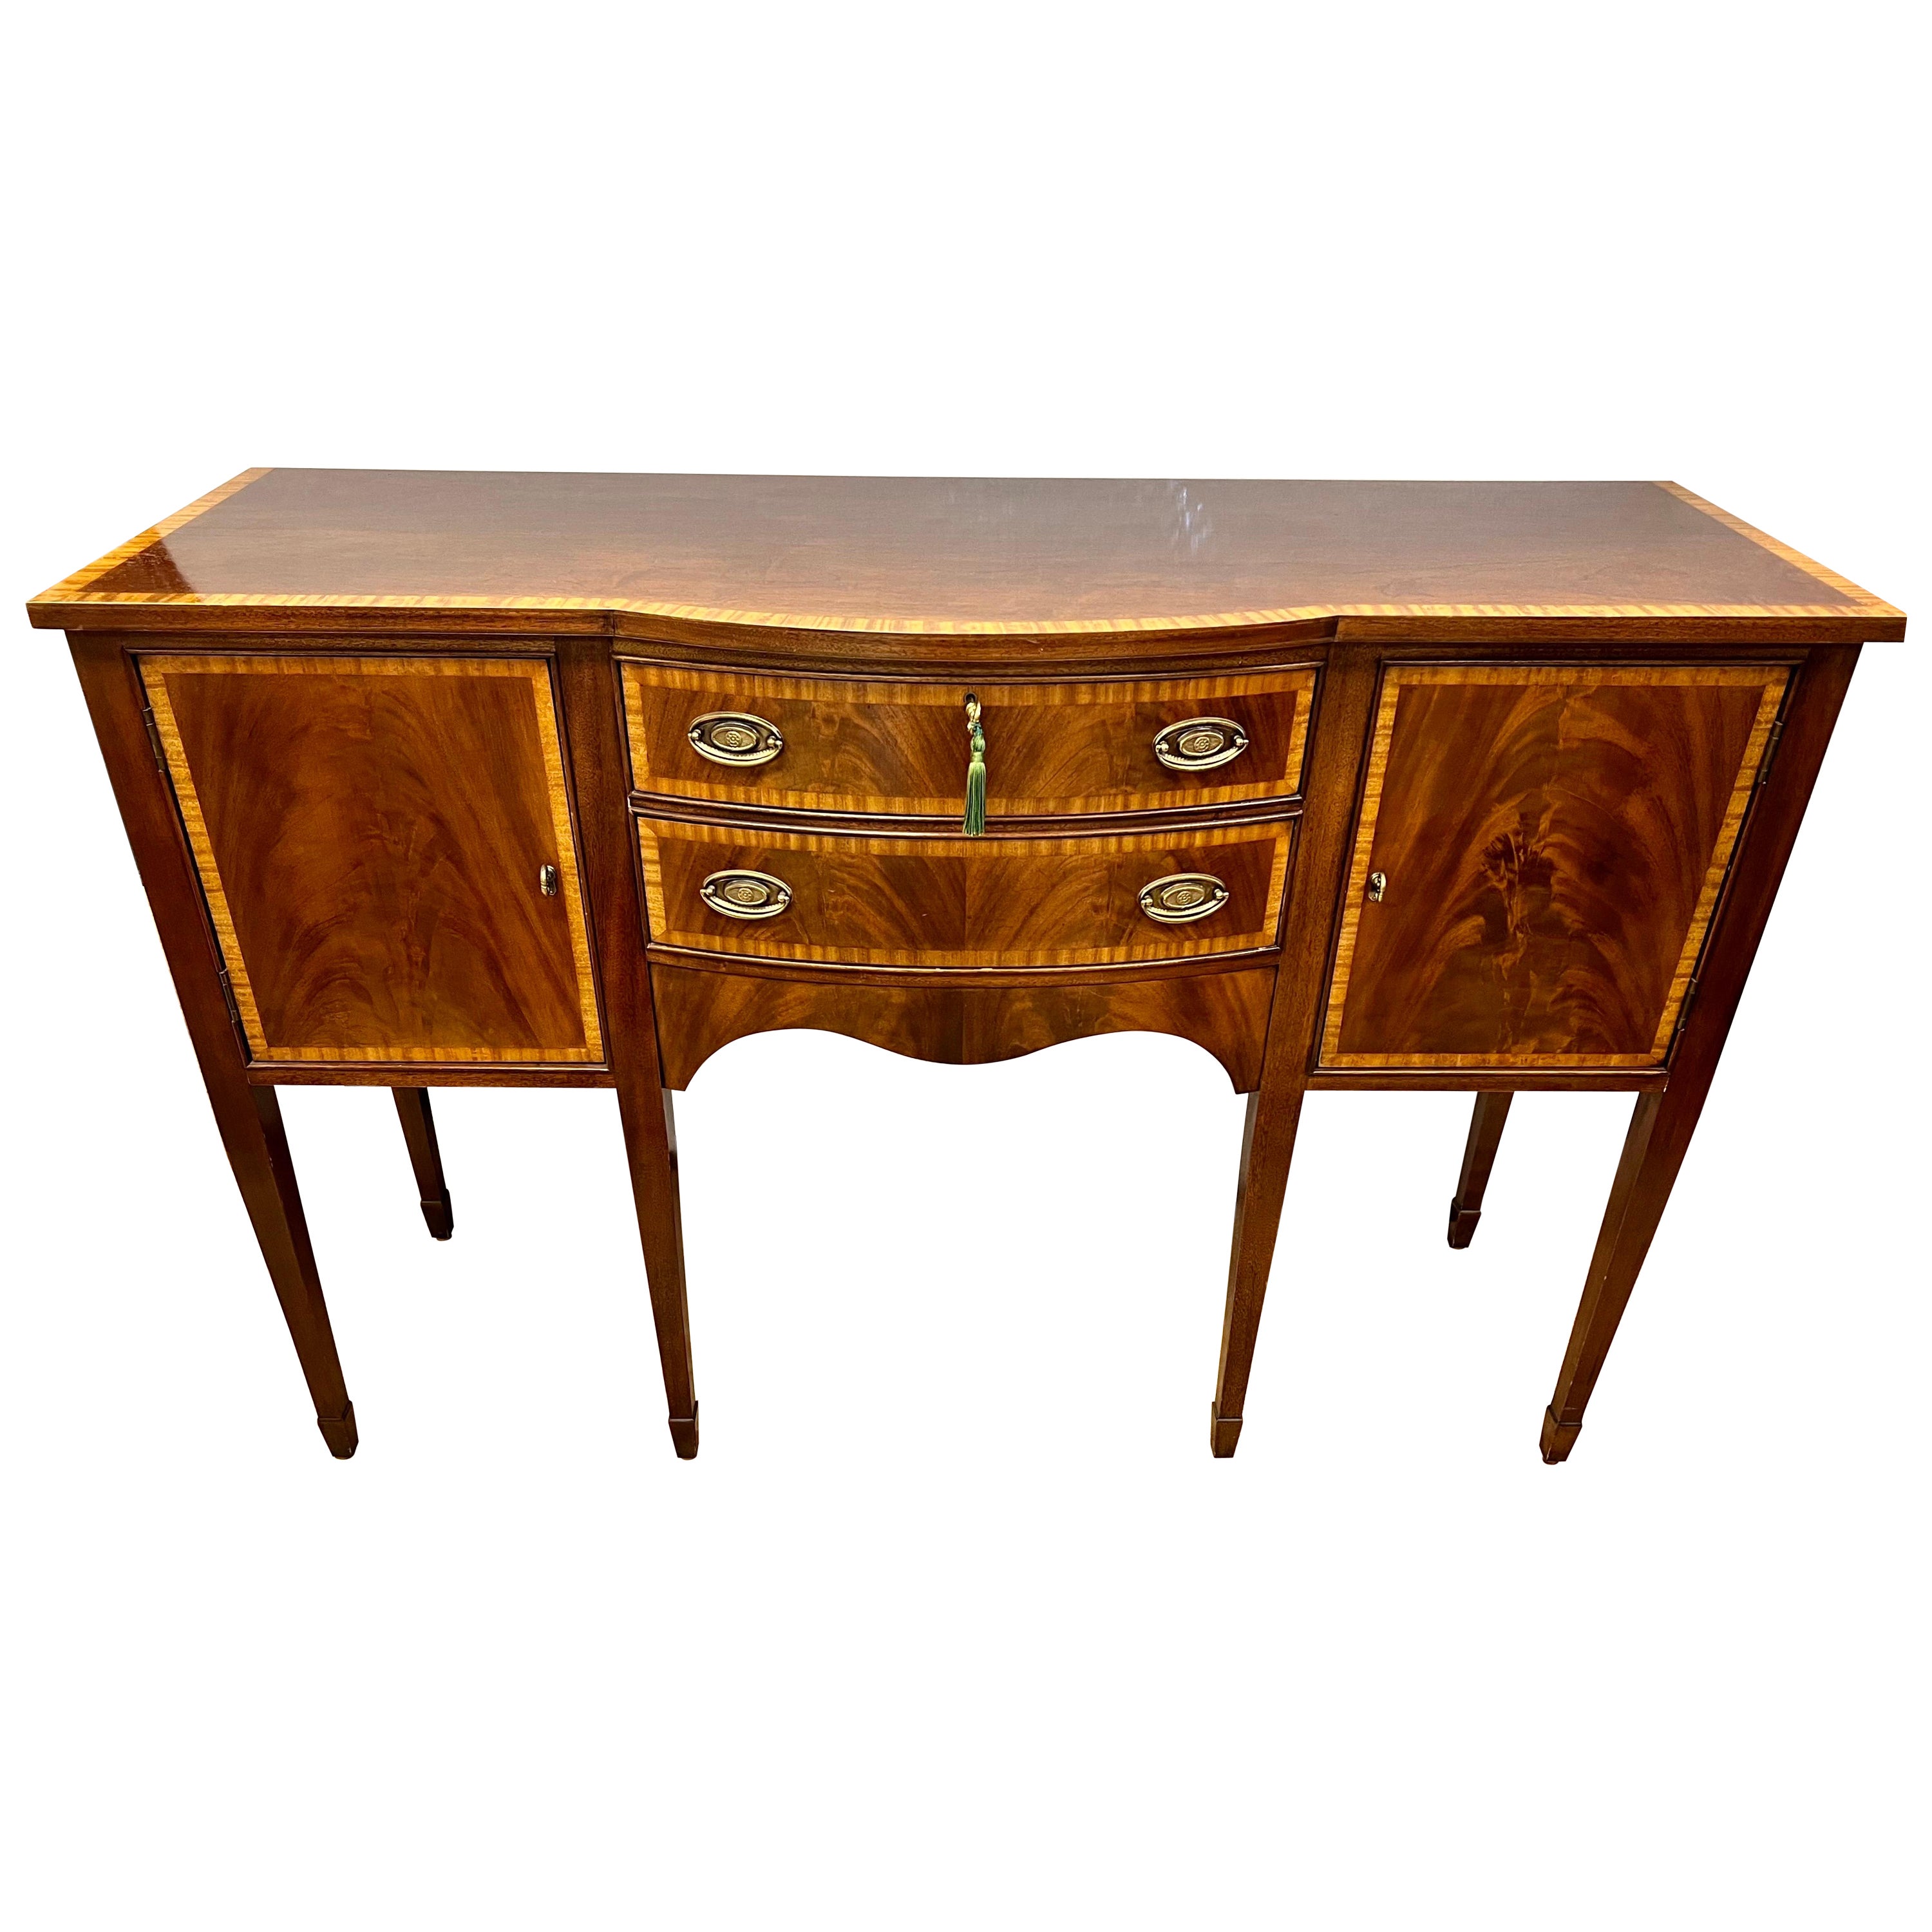 Late 20th Century Mahogany Inlay Ethan Allen Server Buffet Cabinet Sideboard Bar